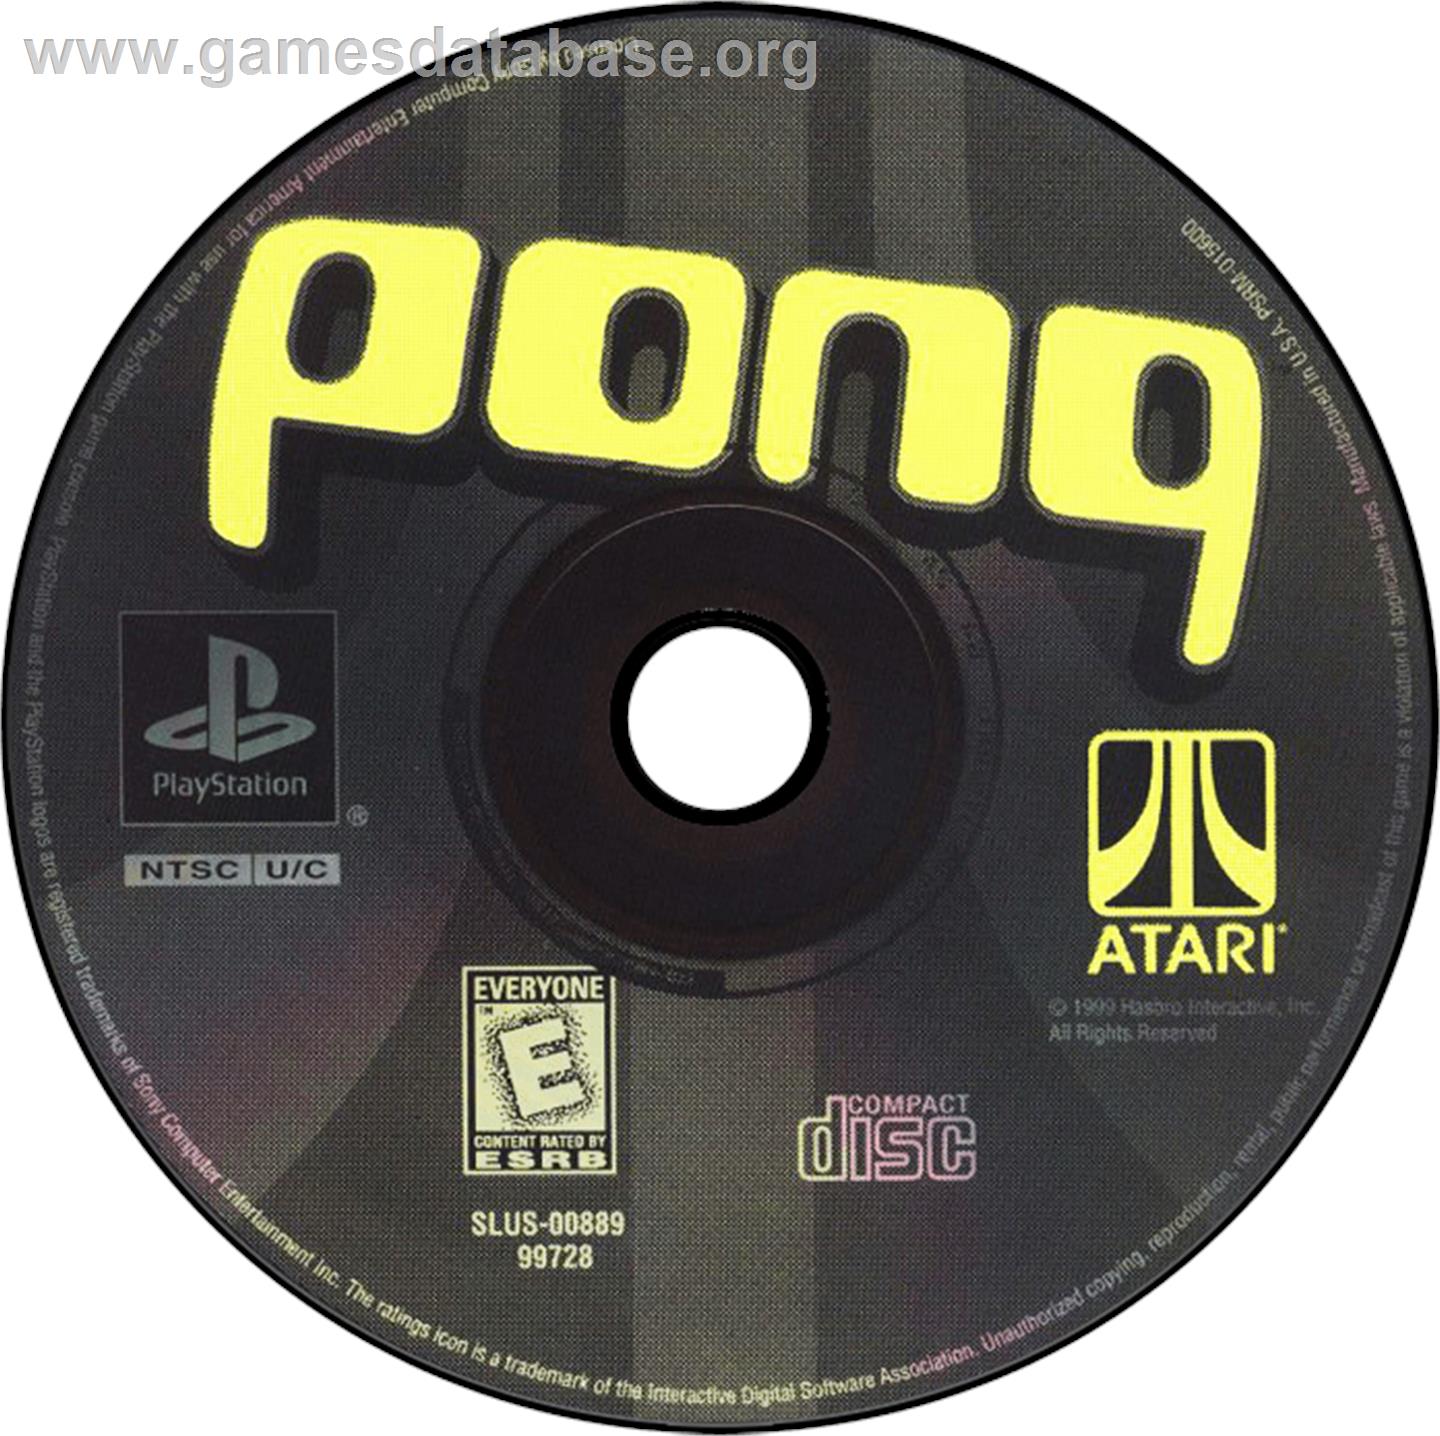 Pong: The Next Level - Sony Playstation - Artwork - Disc